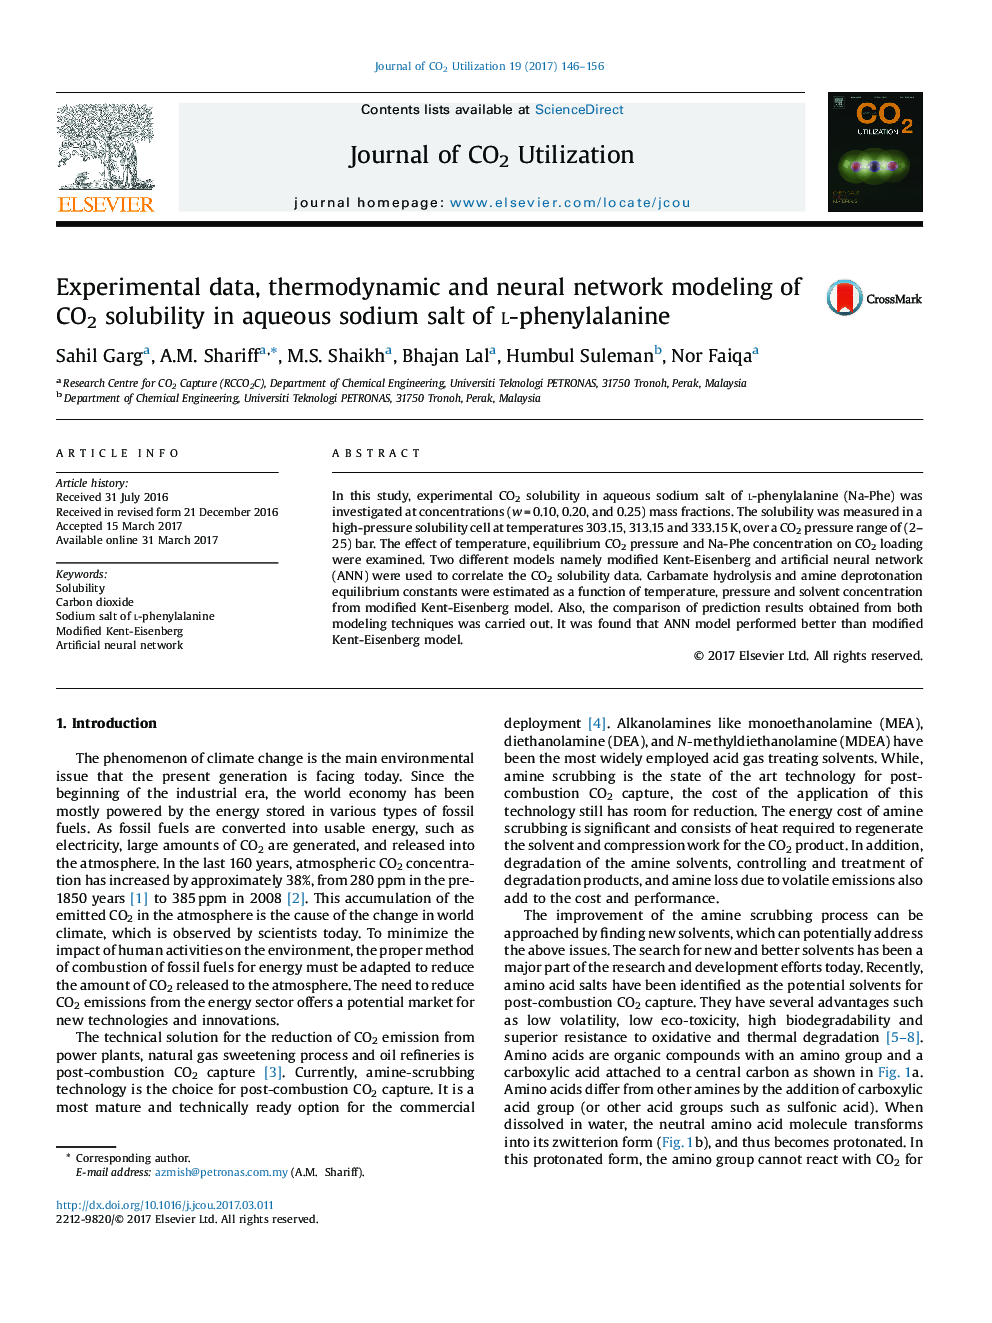 Experimental data, thermodynamic and neural network modeling of CO2 solubility in aqueous sodium salt of l-phenylalanine